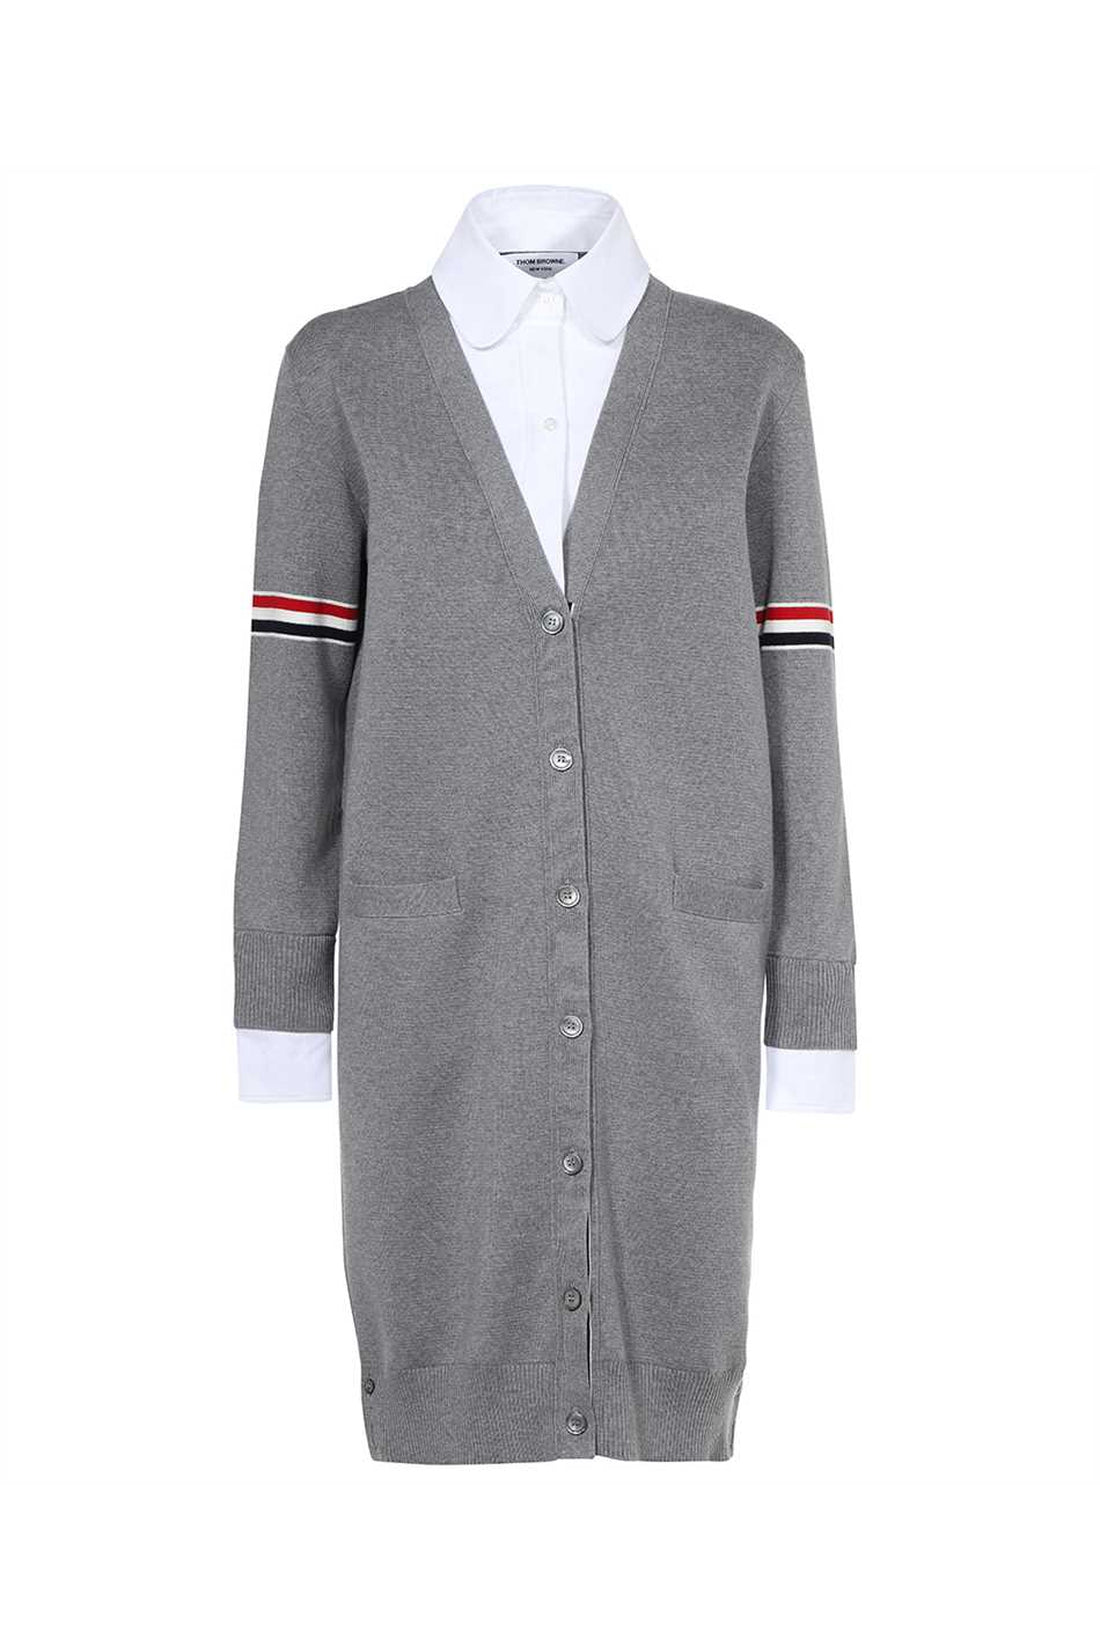 Thom Browne-OUTLET-SALE-Long knitted cardigan-ARCHIVIST